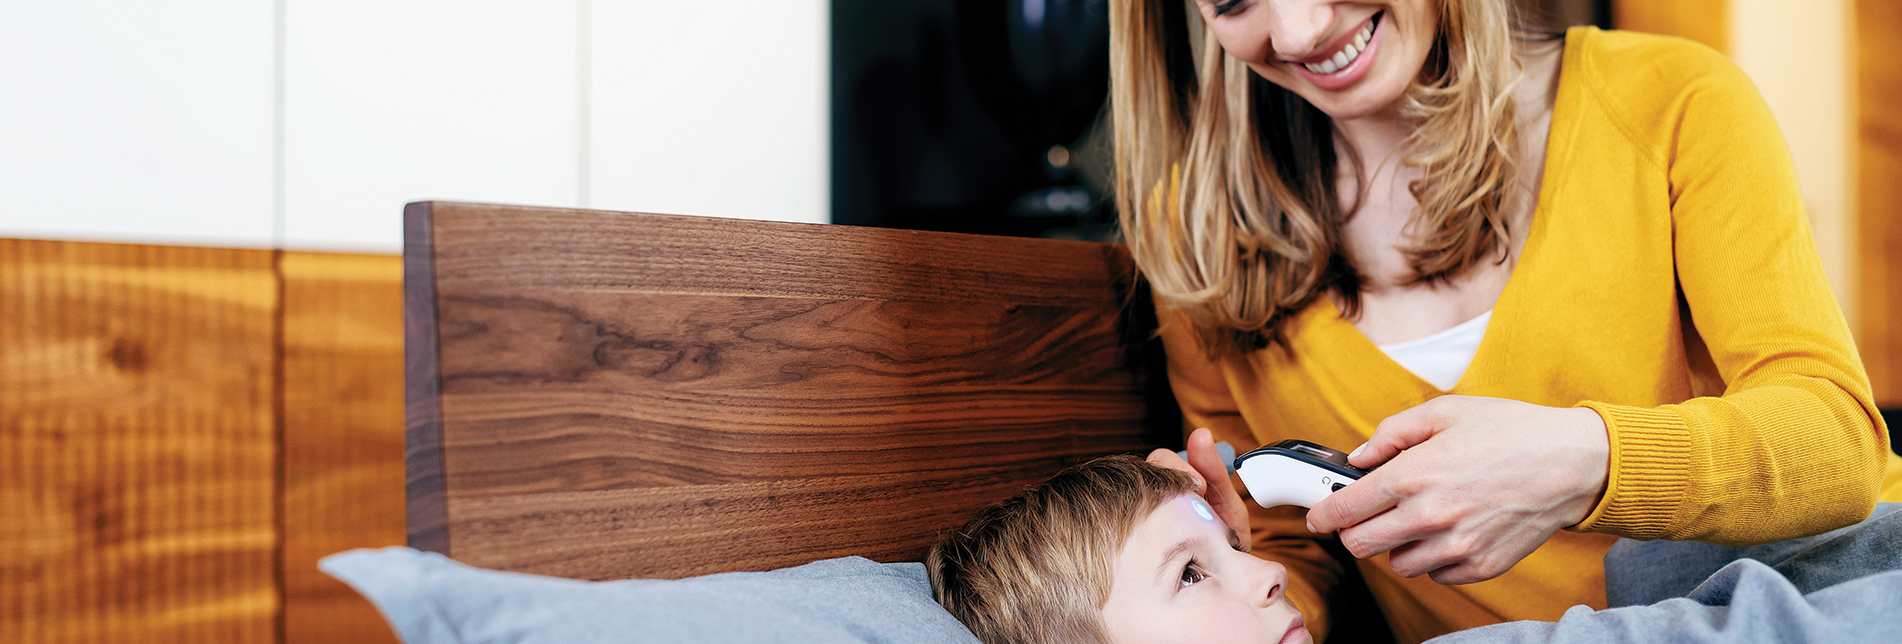 The Microlife NC 150 BT thermometer connects to the “Microlife Connected Health +” app by using Bluetooth® Smart and enables easy monitoring of the temperature.